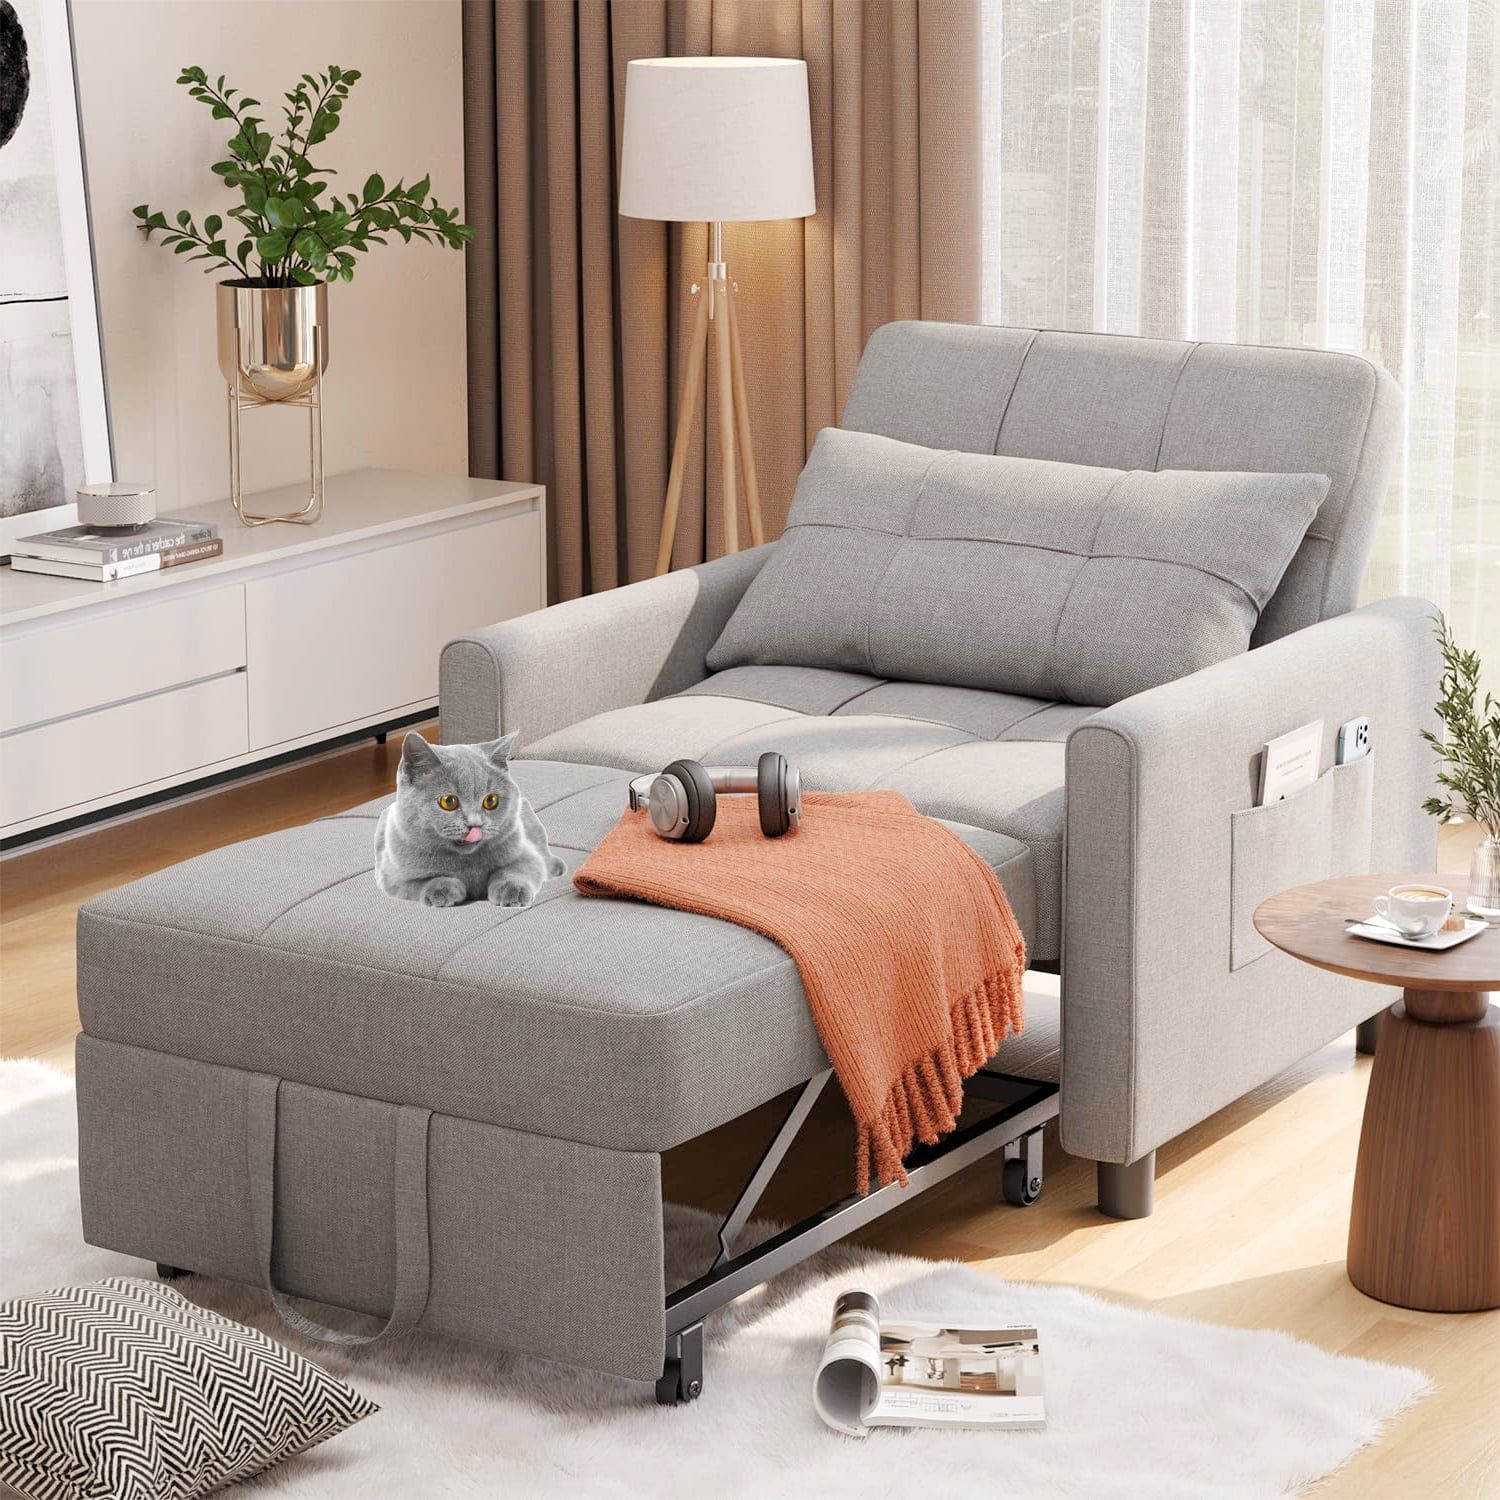 Lofka Sofa Bed, Convertible Chair Bed 3 In 1 Single Couch Bed, Light Gray –  Walmart Throughout Convertible Light Gray Chair Beds (View 2 of 15)